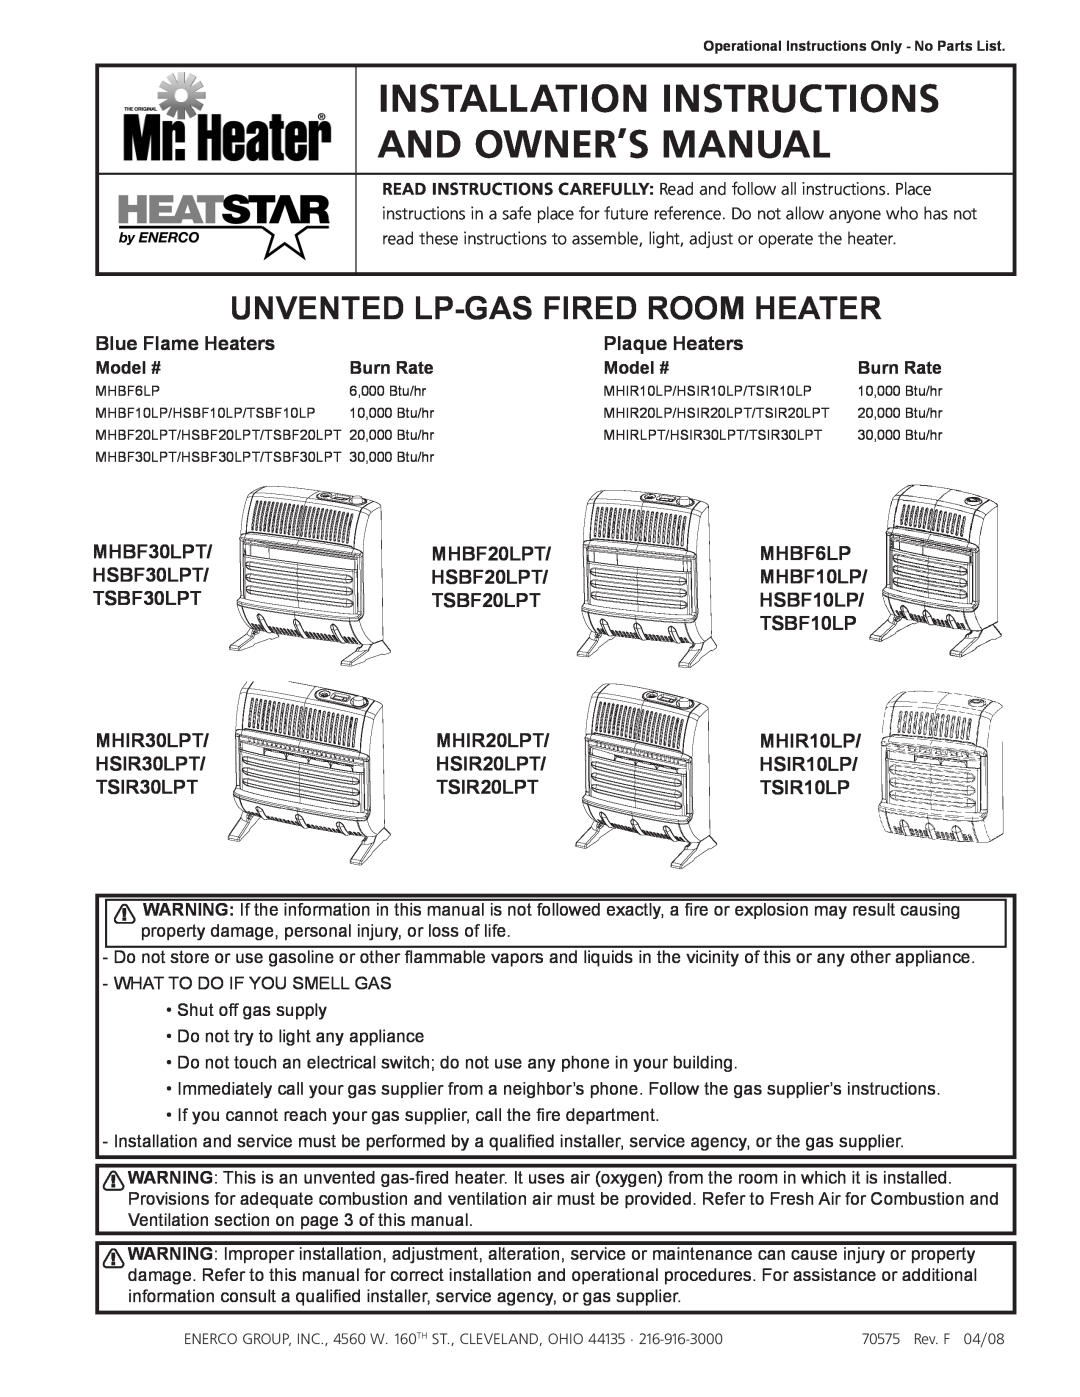 Enerco HSBF10LP, MHBF6LP, HSBF20LPT, HSIR30LPT, HSIR20LPT installation instructions Unvented Lp-Gasfired Room Heater 